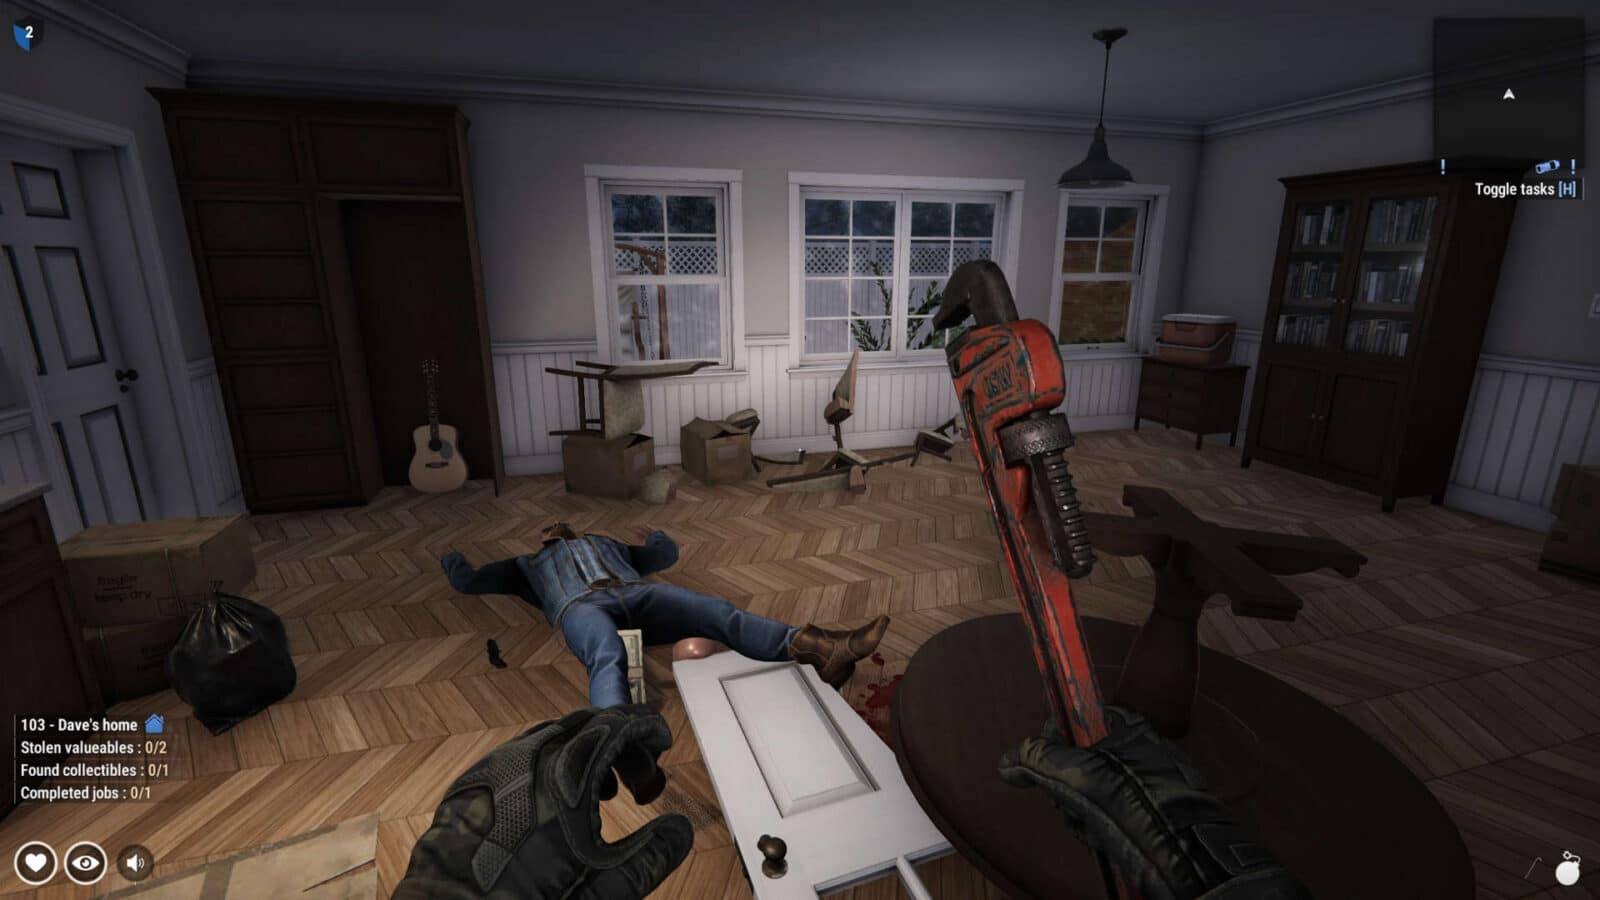 Crime Simulator revealed. Get your crowbars ready!